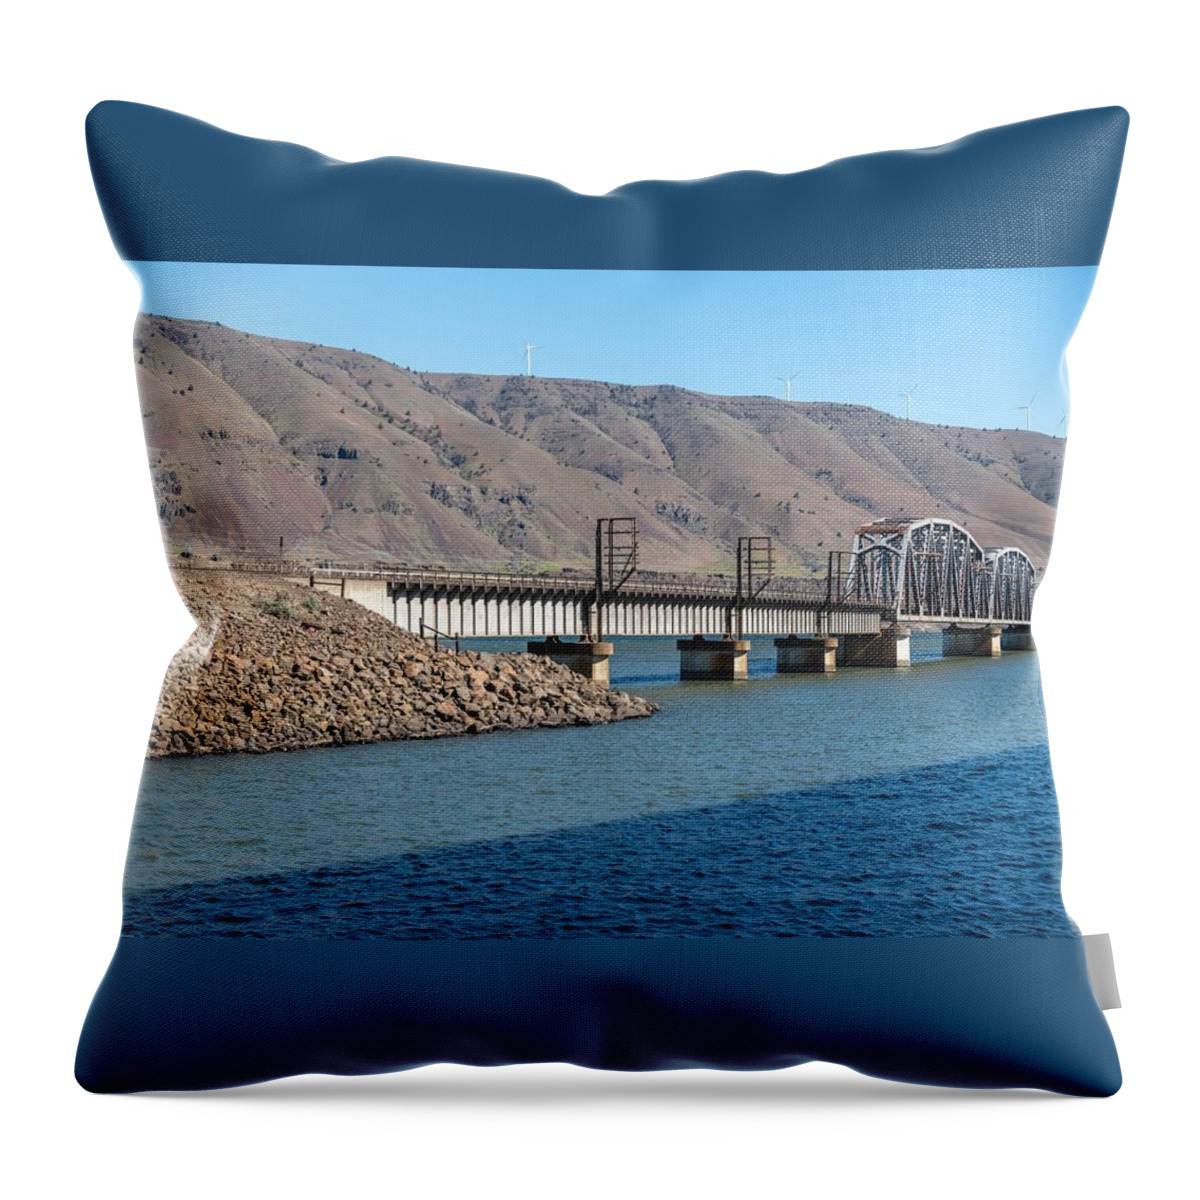 Union Pacific Crosses John Day River Throw Pillow featuring the photograph Union Pacific Crosses John Day River by Tom Cochran